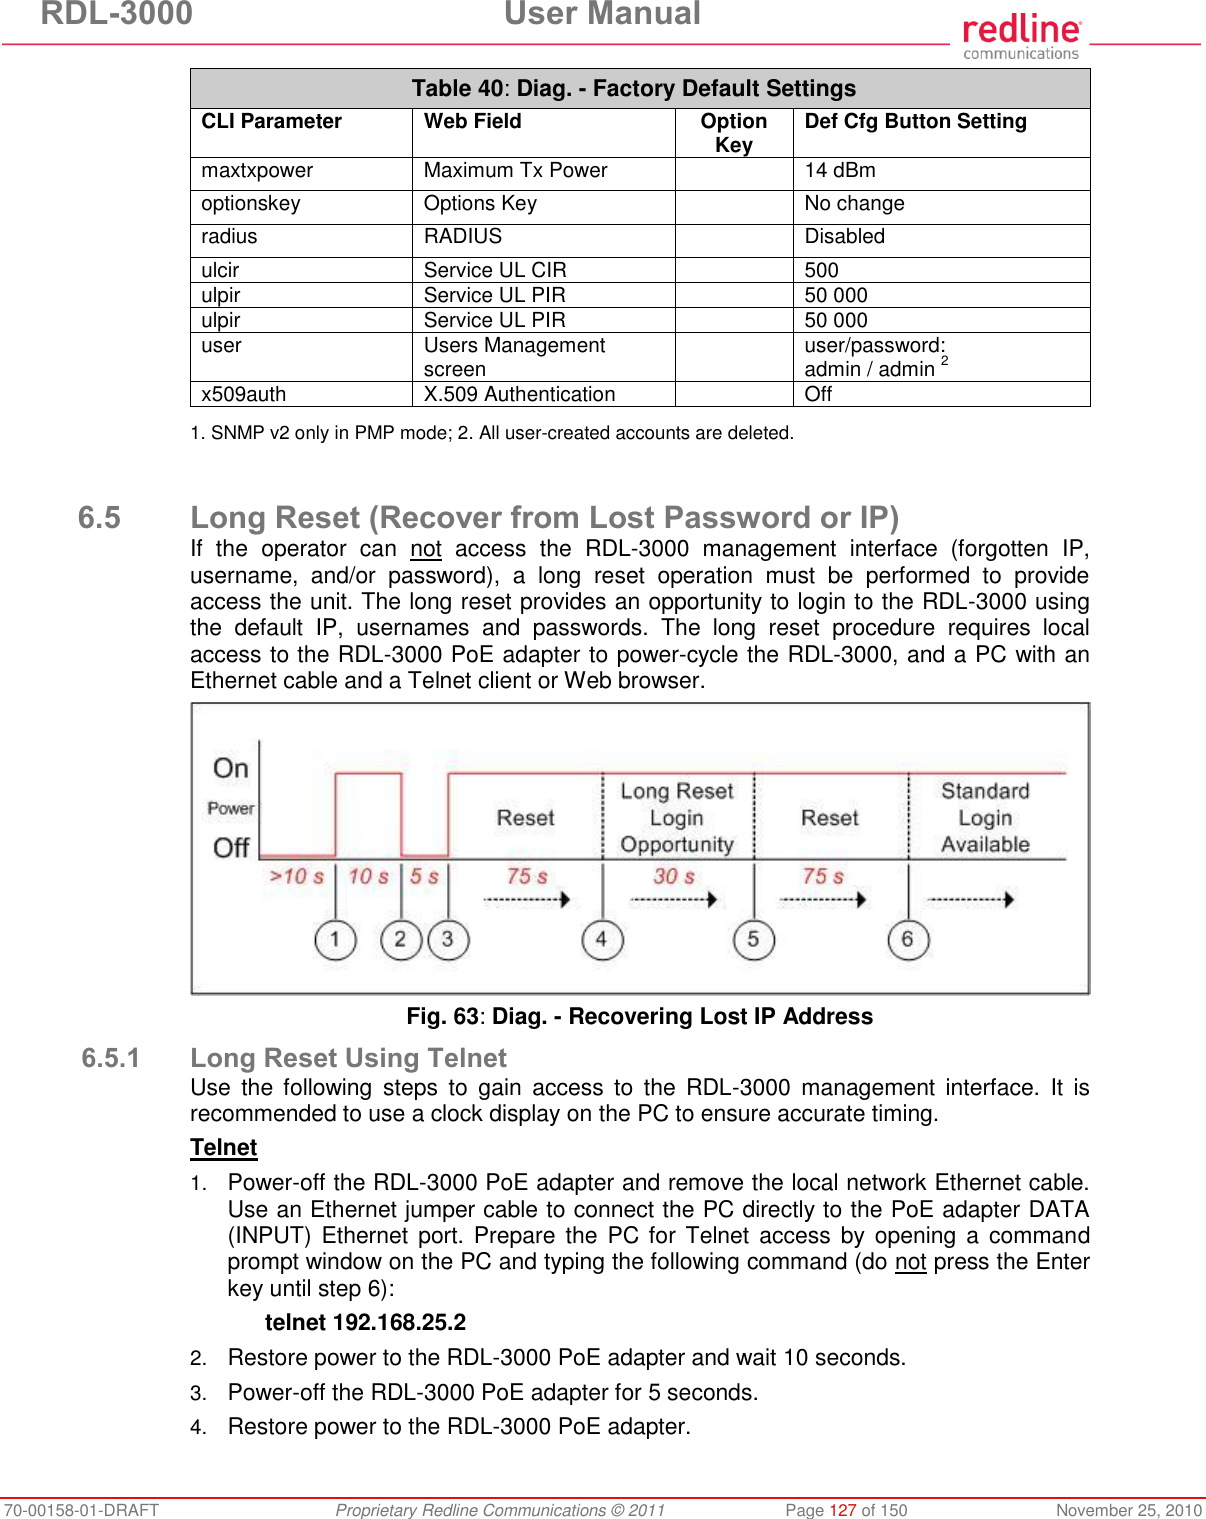 RDL-3000  User Manual 70-00158-01-DRAFT  Proprietary Redline Communications © 2011  Page 127 of 150  November 25, 2010 Table 40: Diag. - Factory Default Settings CLI Parameter Web Field Option Key Def Cfg Button Setting maxtxpower Maximum Tx Power  14 dBm optionskey Options Key  No change radius RADIUS  Disabled ulcir Service UL CIR  500 ulpir Service UL PIR  50 000 ulpir Service UL PIR  50 000 user Users Management screen  user/password: admin / admin 2 x509auth X.509 Authentication  Off  1. SNMP v2 only in PMP mode; 2. All user-created accounts are deleted.   6.5 Long Reset (Recover from Lost Password or IP) If  the  operator  can  not  access  the  RDL-3000  management  interface  (forgotten  IP, username,  and/or  password),  a  long  reset  operation  must  be  performed  to  provide access the unit. The long reset provides an opportunity to login to the RDL-3000 using the  default  IP,  usernames  and  passwords.  The  long  reset  procedure  requires  local access to the RDL-3000 PoE adapter to power-cycle the RDL-3000, and a PC with an Ethernet cable and a Telnet client or Web browser.   Fig. 63: Diag. - Recovering Lost IP Address 6.5.1 Long Reset Using Telnet Use  the  following  steps  to  gain  access  to  the  RDL-3000  management  interface.  It  is recommended to use a clock display on the PC to ensure accurate timing. Telnet 1. Power-off the RDL-3000 PoE adapter and remove the local network Ethernet cable. Use an Ethernet jumper cable to connect the PC directly to the PoE adapter DATA (INPUT) Ethernet port. Prepare  the  PC  for  Telnet access  by opening a  command prompt window on the PC and typing the following command (do not press the Enter key until step 6):   telnet 192.168.25.2 2. Restore power to the RDL-3000 PoE adapter and wait 10 seconds. 3. Power-off the RDL-3000 PoE adapter for 5 seconds. 4. Restore power to the RDL-3000 PoE adapter. 